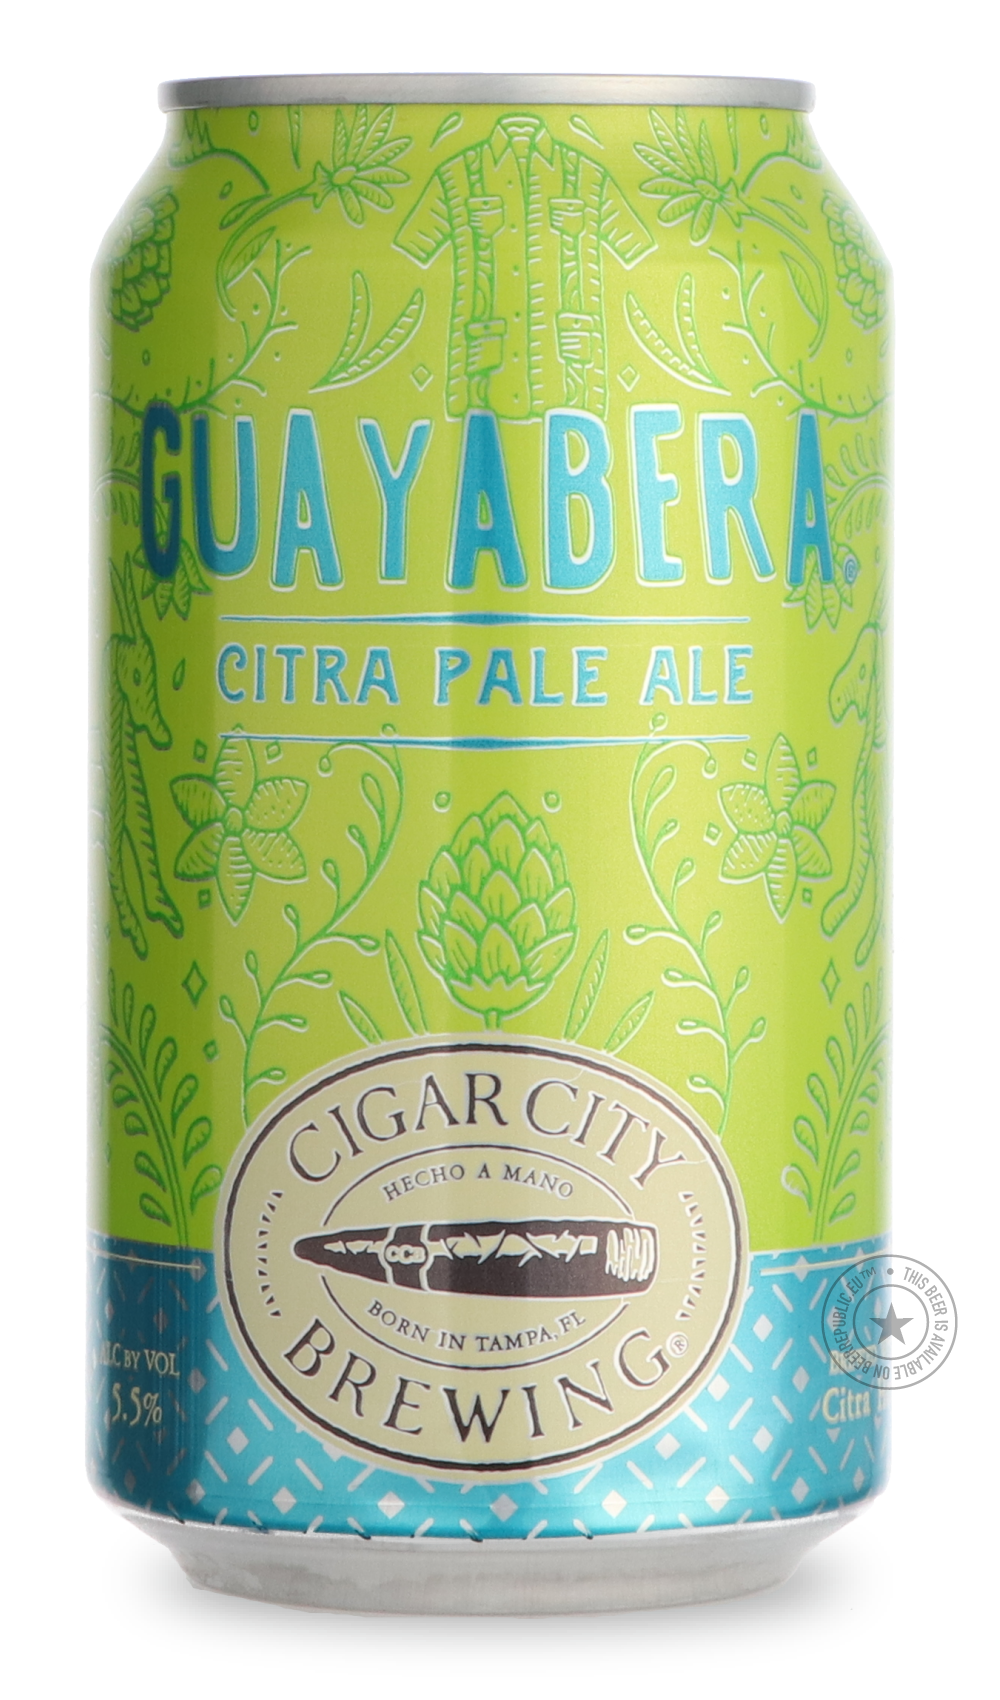 -Cigar City- Guayabera®-Pale- Only @ Beer Republic - The best online beer store for American & Canadian craft beer - Buy beer online from the USA and Canada - Bier online kopen - Amerikaans bier kopen - Craft beer store - Craft beer kopen - Amerikanisch bier kaufen - Bier online kaufen - Acheter biere online - IPA - Stout - Porter - New England IPA - Hazy IPA - Imperial Stout - Barrel Aged - Barrel Aged Imperial Stout - Brown - Dark beer - Blond - Blonde - Pilsner - Lager - Wheat - Weizen - Amber - Barley W